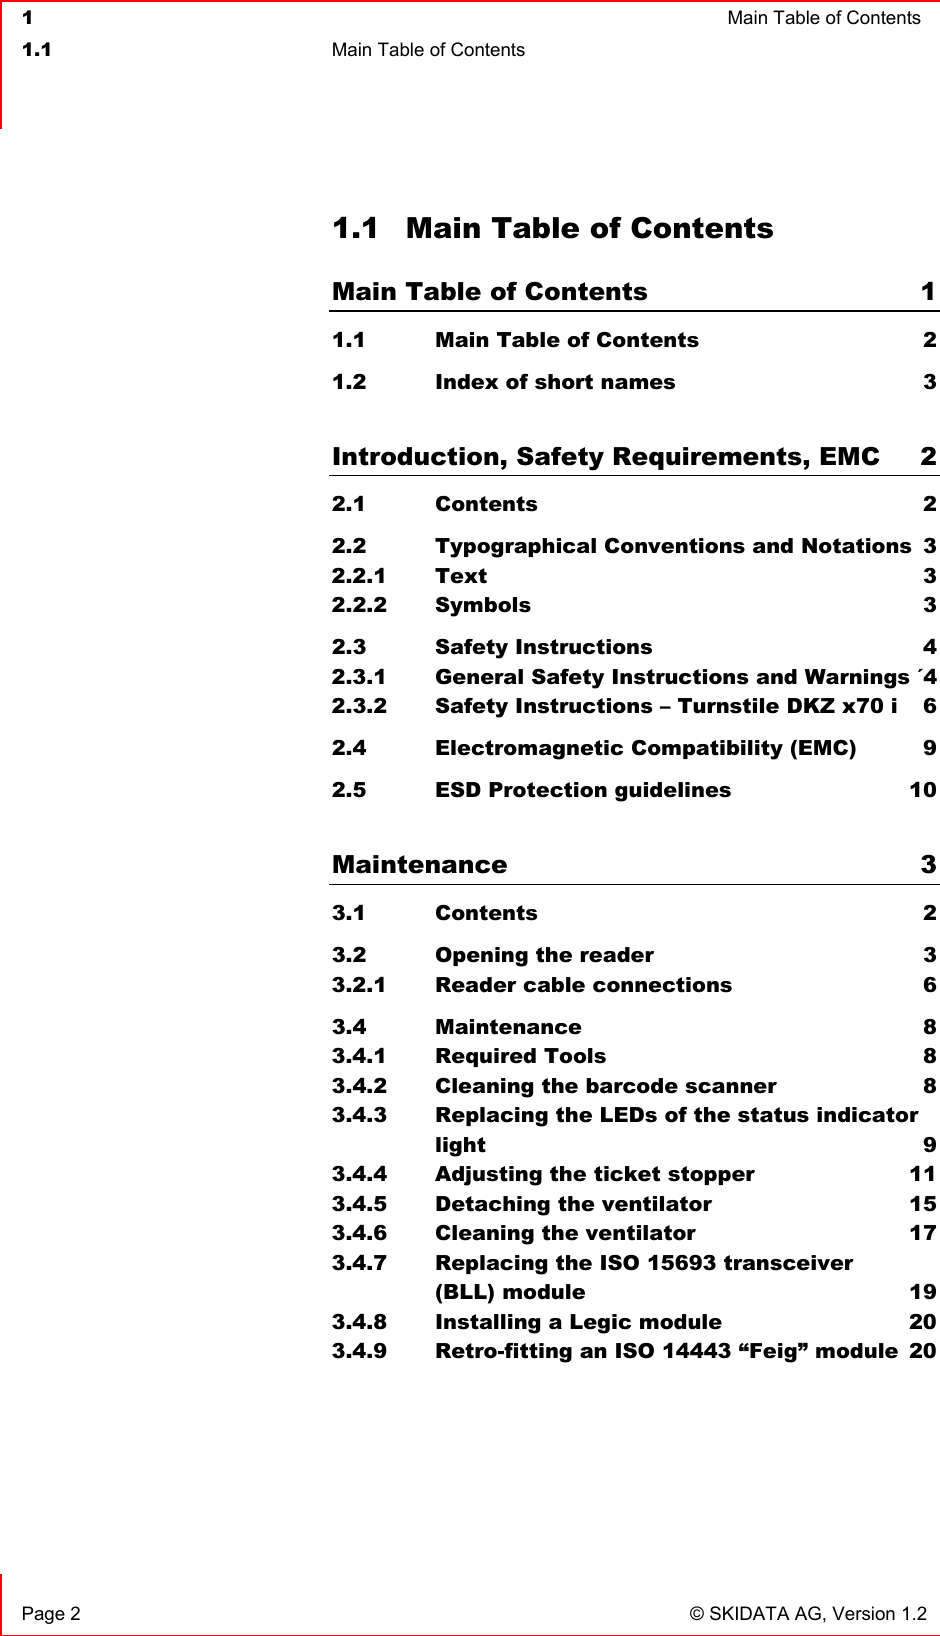  1  Main Table of Contents  1.1  Main Table of Contents    Page 2  © SKIDATA AG, Version 1.2 1.1  Main Table of Contents Main Table of Contents  1 1.1   Main Table of Contents  2 1.2   Index of short names  3  Introduction, Safety Requirements, EMC  2 2.1   Contents  2 2.2   Typographical Conventions and Notations  3 2.2.1 Text 3 2.2.2 Symbols 3 2.3   Safety Instructions  4 2.3.1 General Safety Instructions and Warnings ´4 2.3.2 Safety Instructions – Turnstile DKZ x70 i  6 2.4   Electromagnetic Compatibility (EMC)  9 2.5   ESD Protection guidelines  10  Maintenance 3 3.1   Contents  2 3.2   Opening the reader  3 3.2.1 Reader cable connections  6 3.4 Maintenance  8 3.4.1 Required Tools  8 3.4.2 Cleaning the barcode scanner  8 3.4.3 Replacing the LEDs of the status indicator light 9 3.4.4 Adjusting the ticket stopper  11 3.4.5 Detaching the ventilator  15 3.4.6 Cleaning the ventilator  17 3.4.7 Replacing the ISO 15693 transceiver  (BLL) module  19 3.4.8 Installing a Legic module  20 3.4.9 Retro-fitting an ISO 14443 “Feig” module  20     